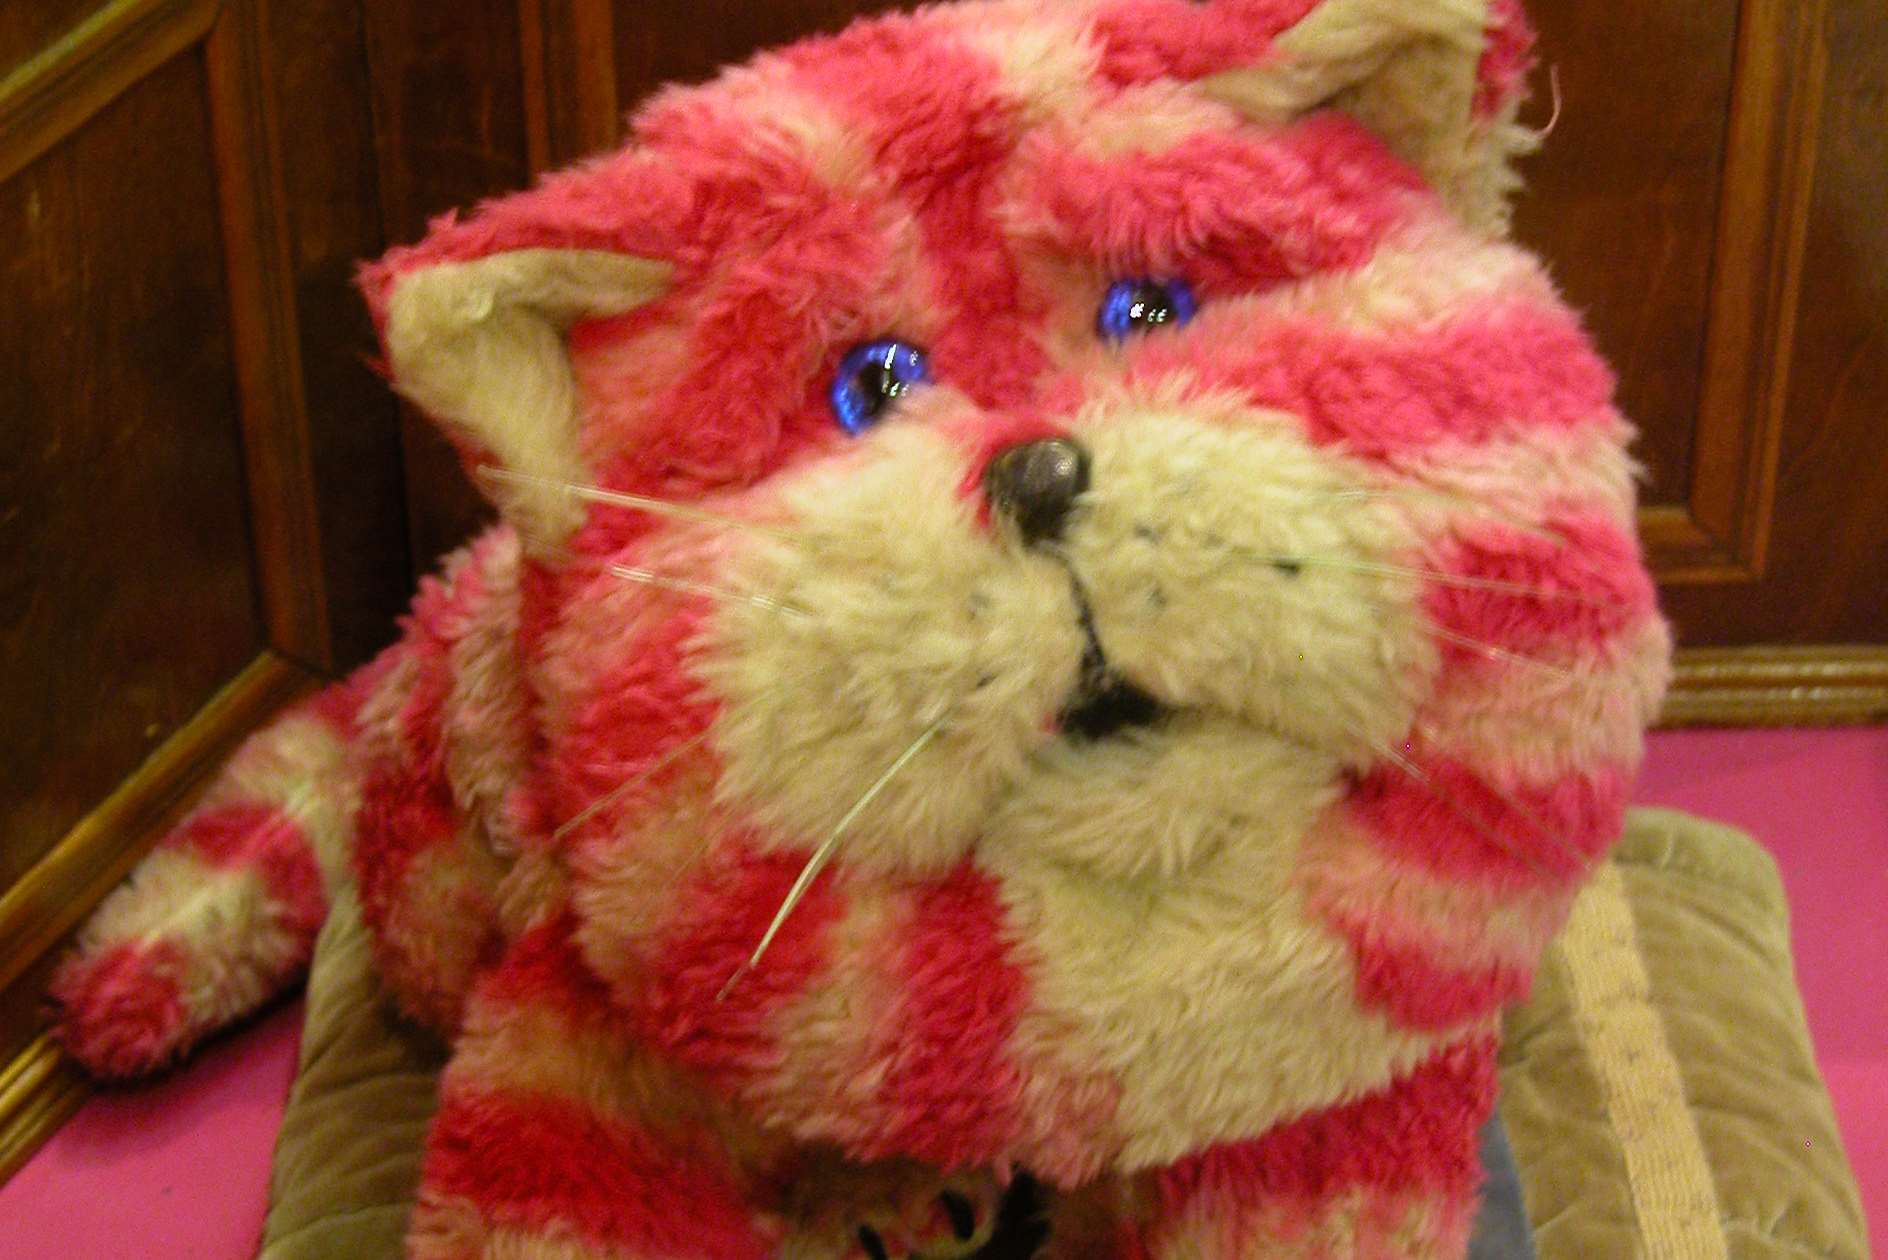 Bagpuss was also created by Peter Firmin and Oliver Postgate